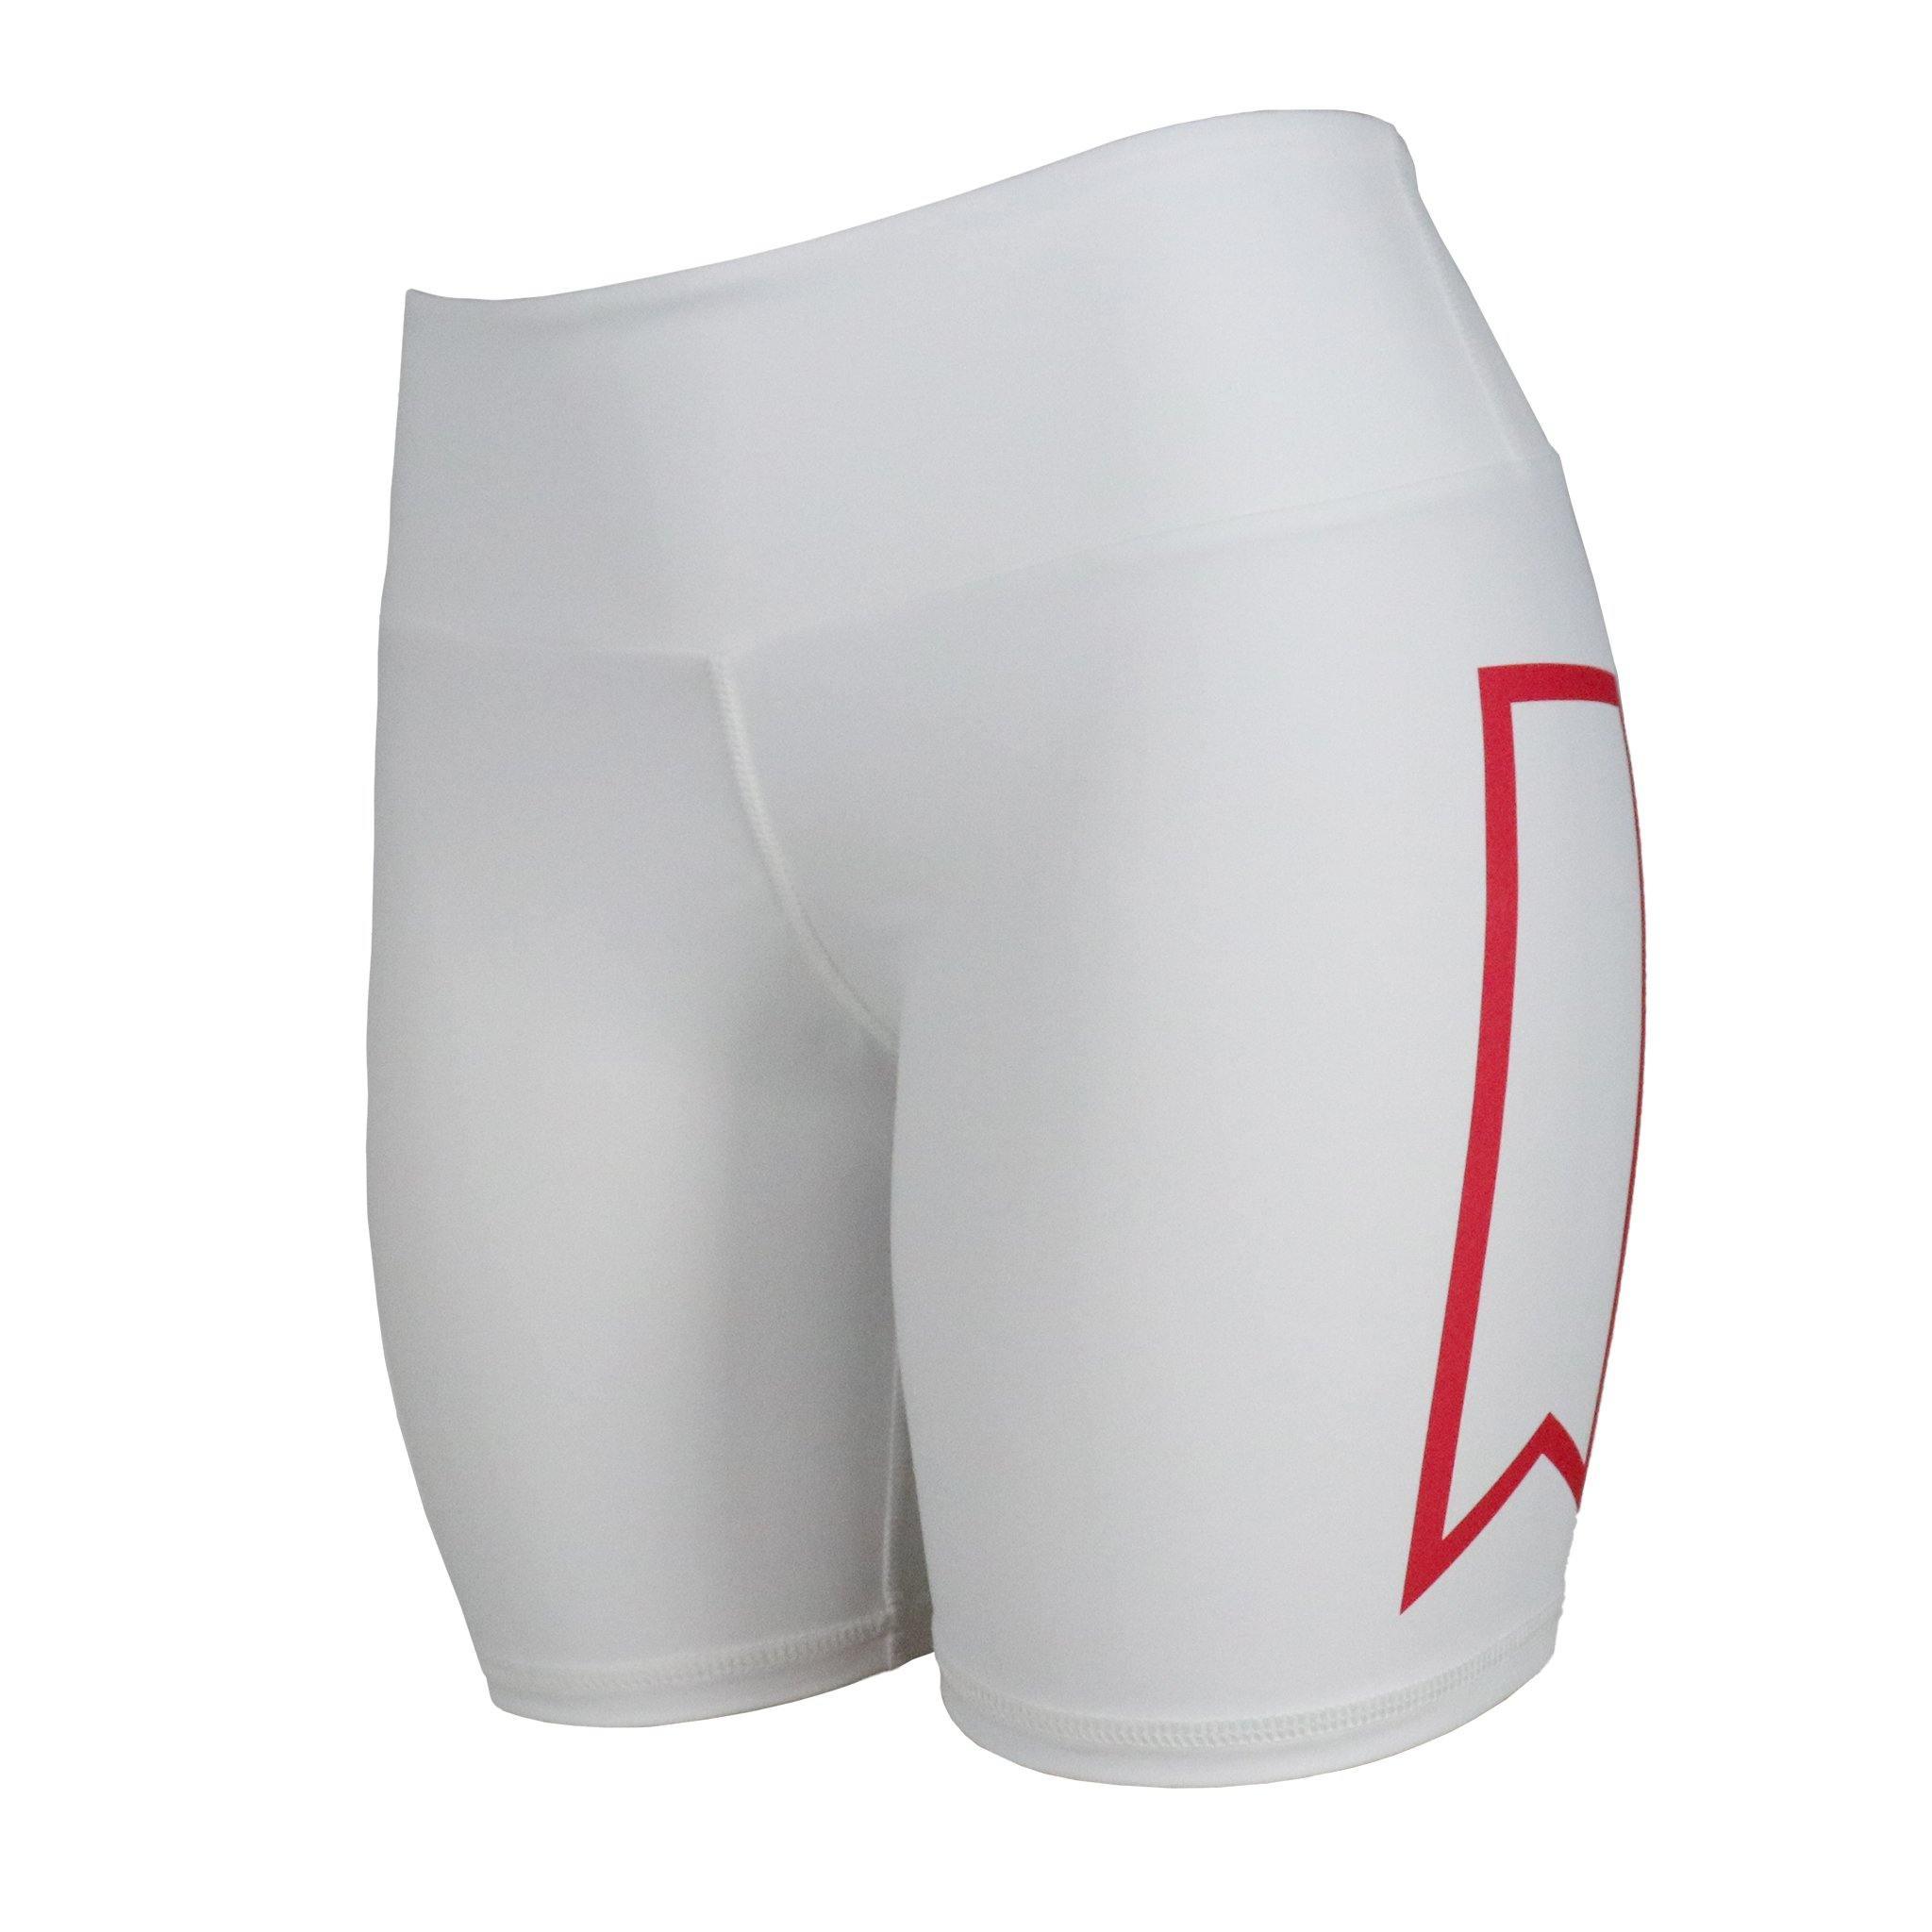 Michelob ULTRA Women's White Stretchy Shorts - Side View